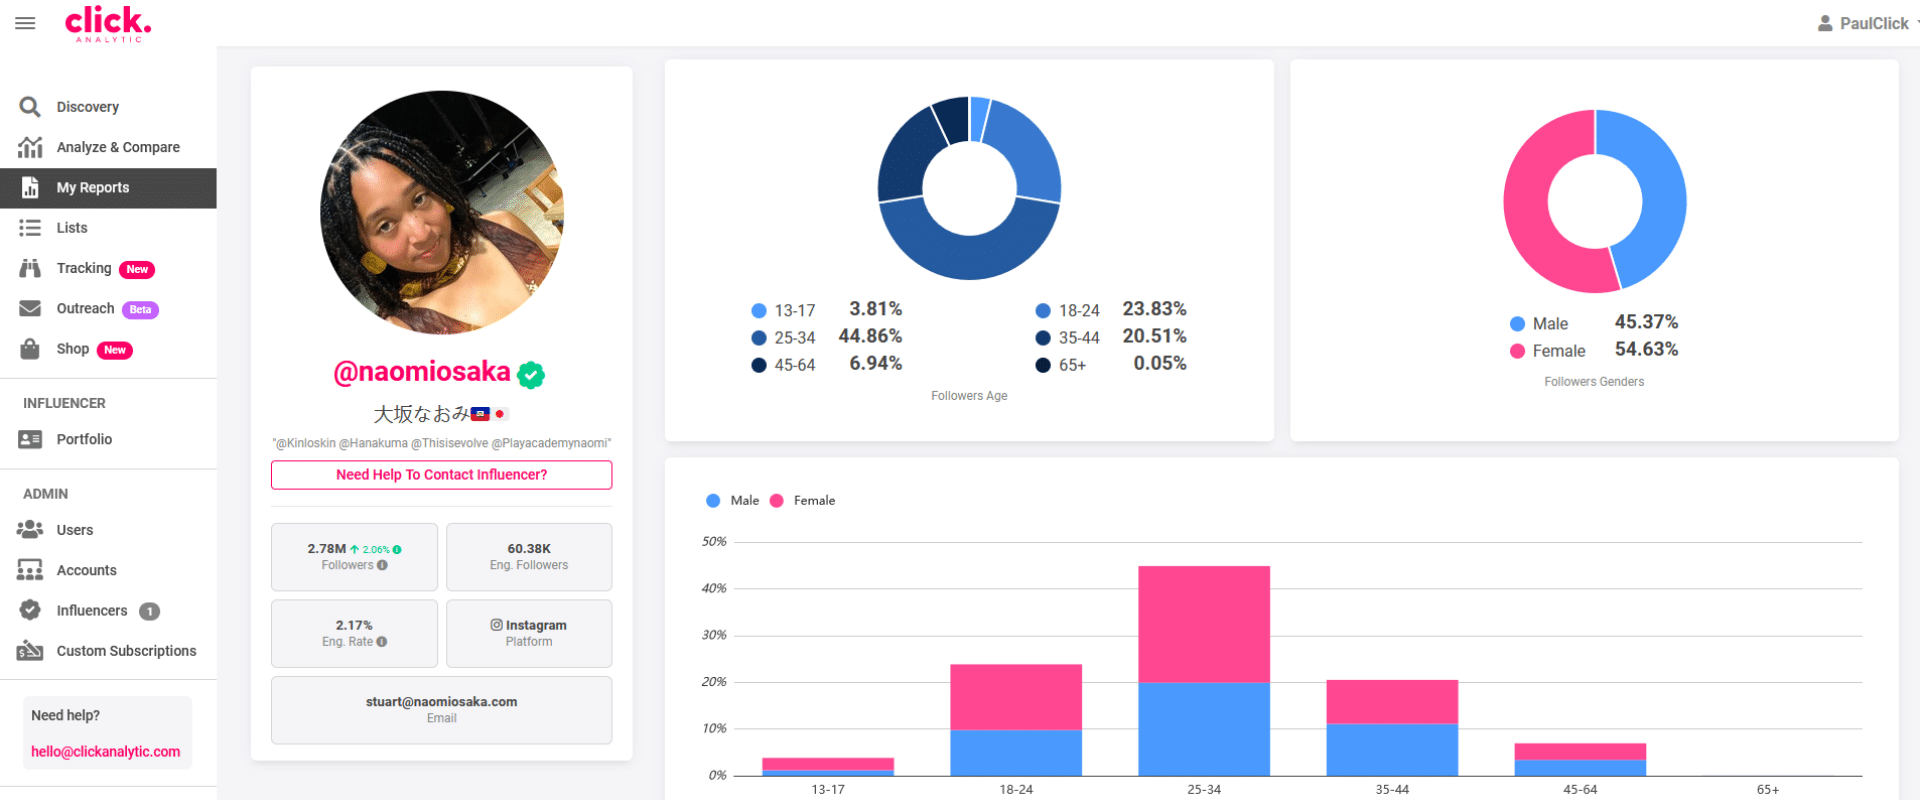 Dashboard interface of a social media analytics tool showing user engagement statistics, demographic breakdown, and a profile picture of a user.